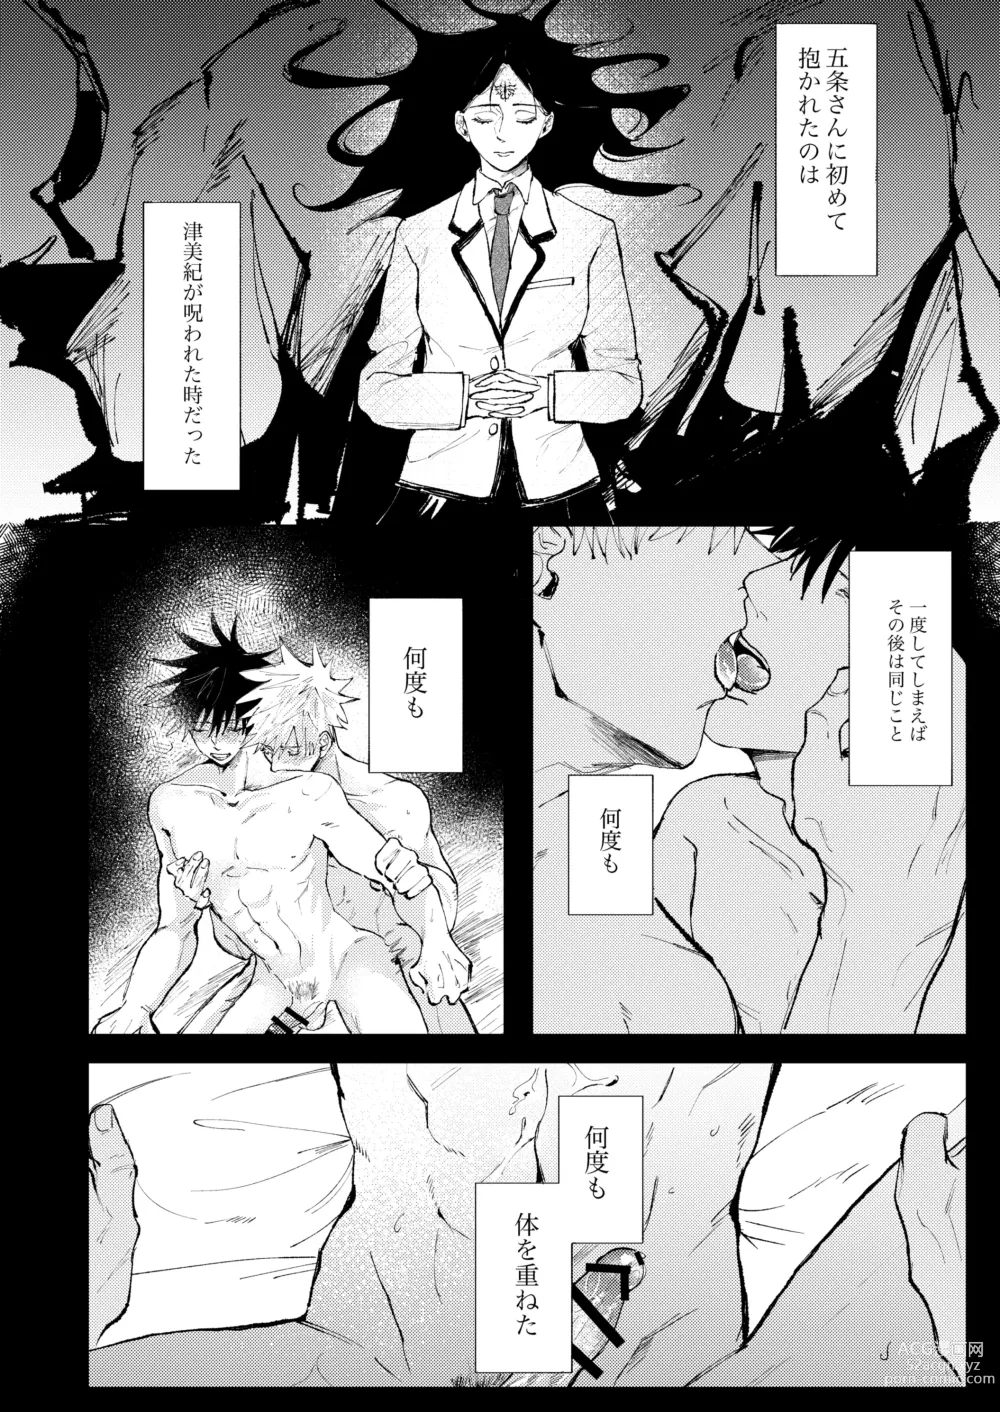 Page 5 of doujinshi Lack of...